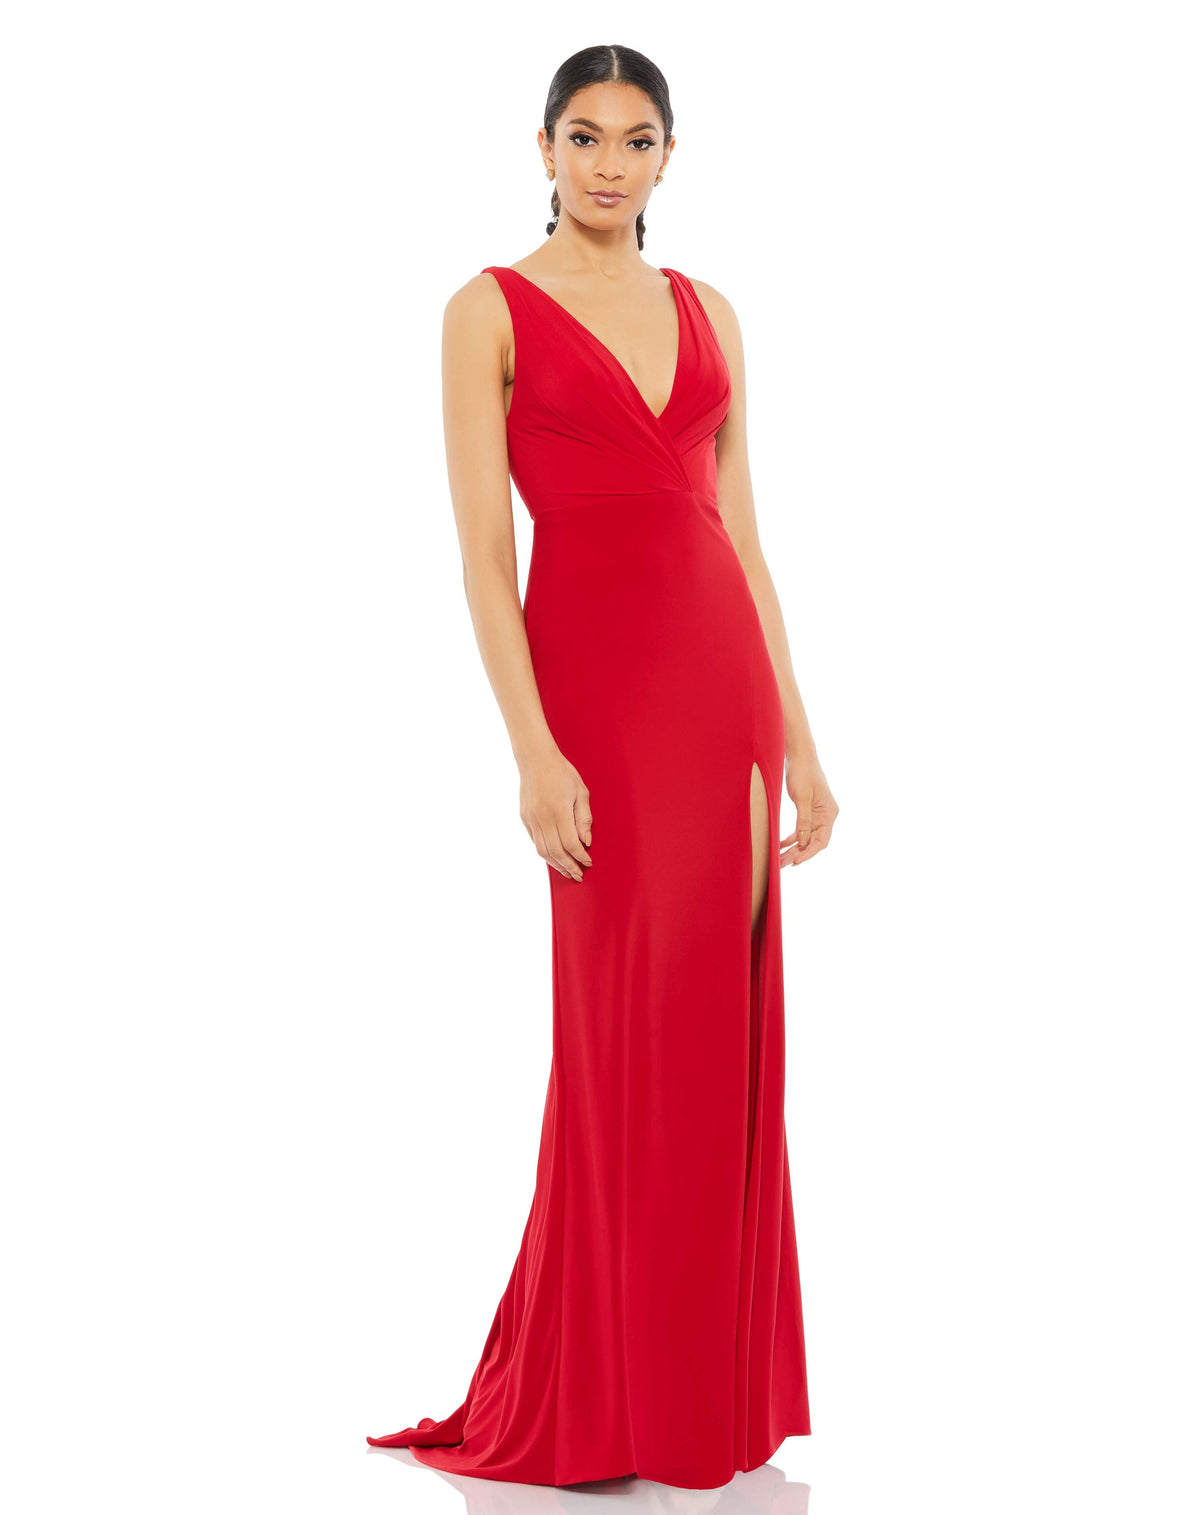 This stunning, red, sleeveless faux-wrap v-neck jersey gown featuring a plunging-v back, gathered sweeping train, and high front slit is a beautiful, full-length evening dress perfect for proms, black-tie affairs, weddings and special events!